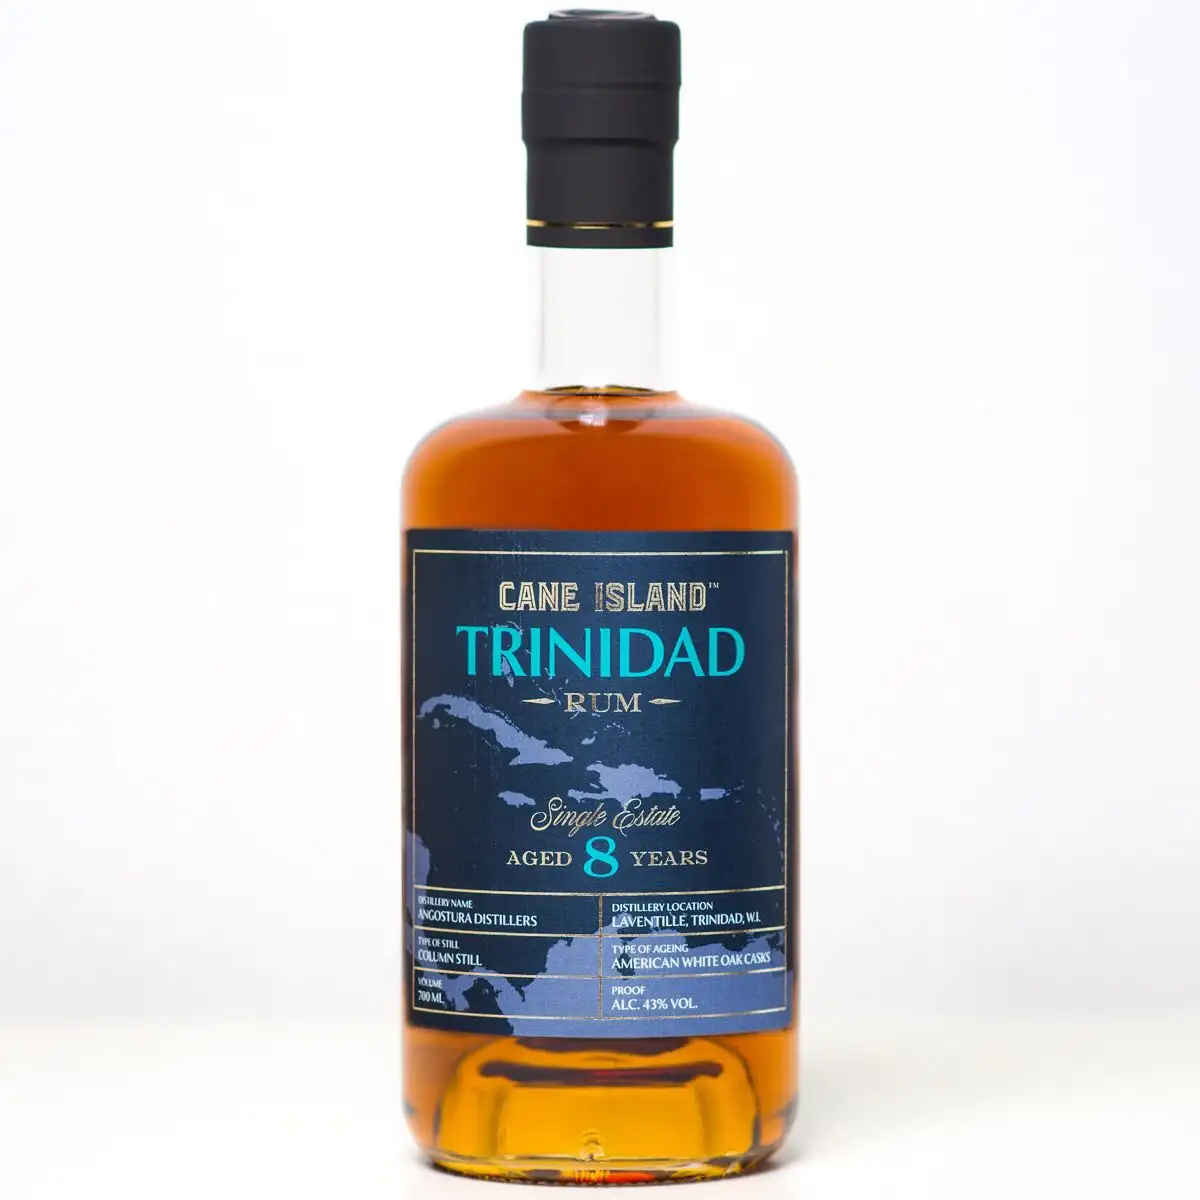 Image of the front of the bottle of the rum Angostura Trinidad